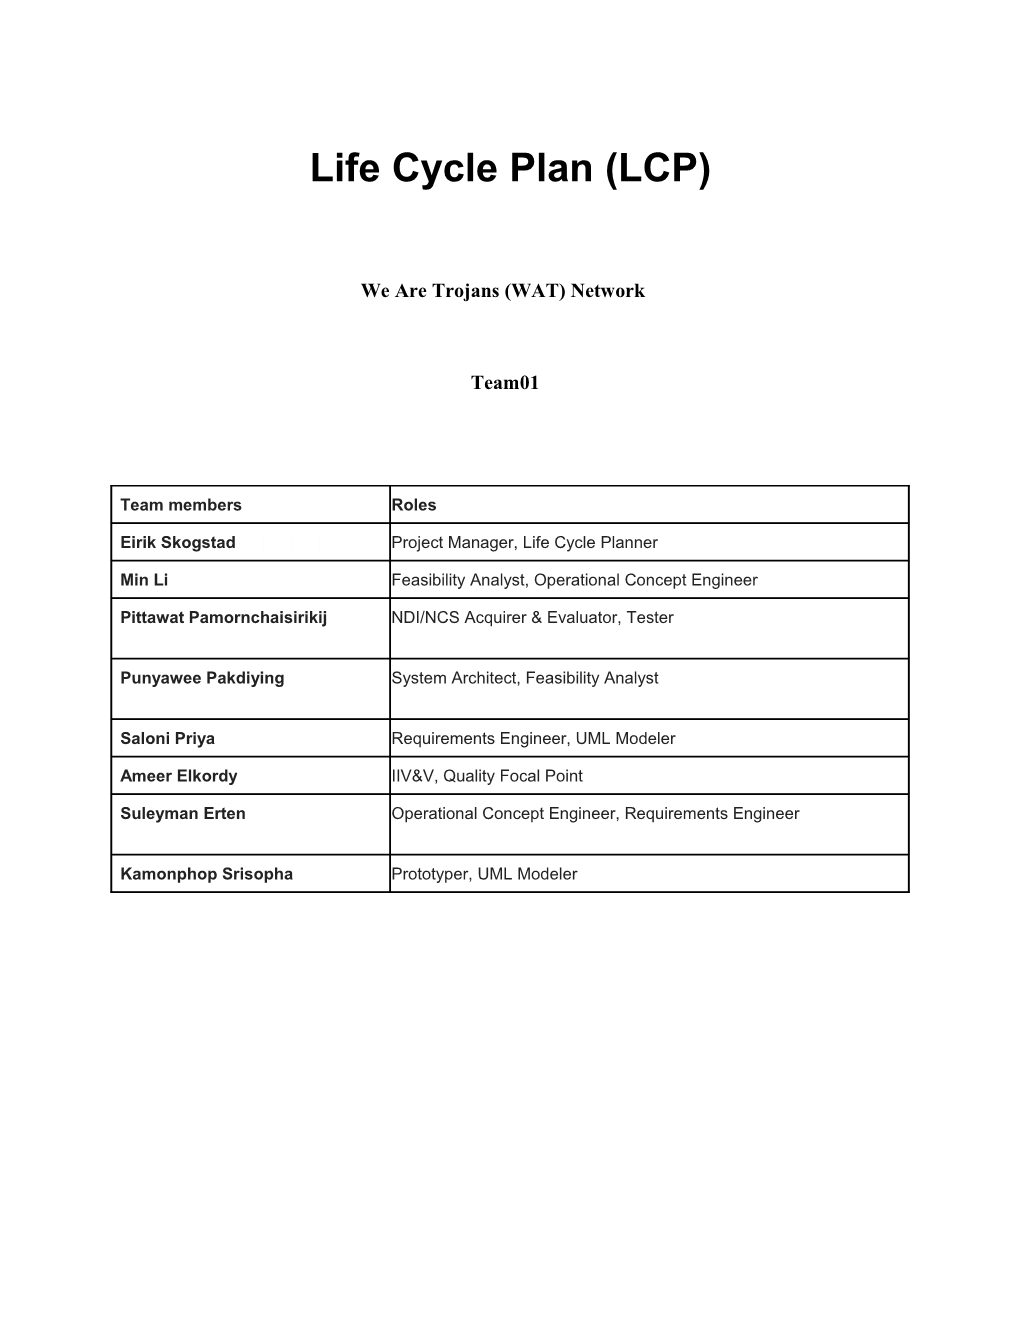 Life Cycle Plan (LCP) s4